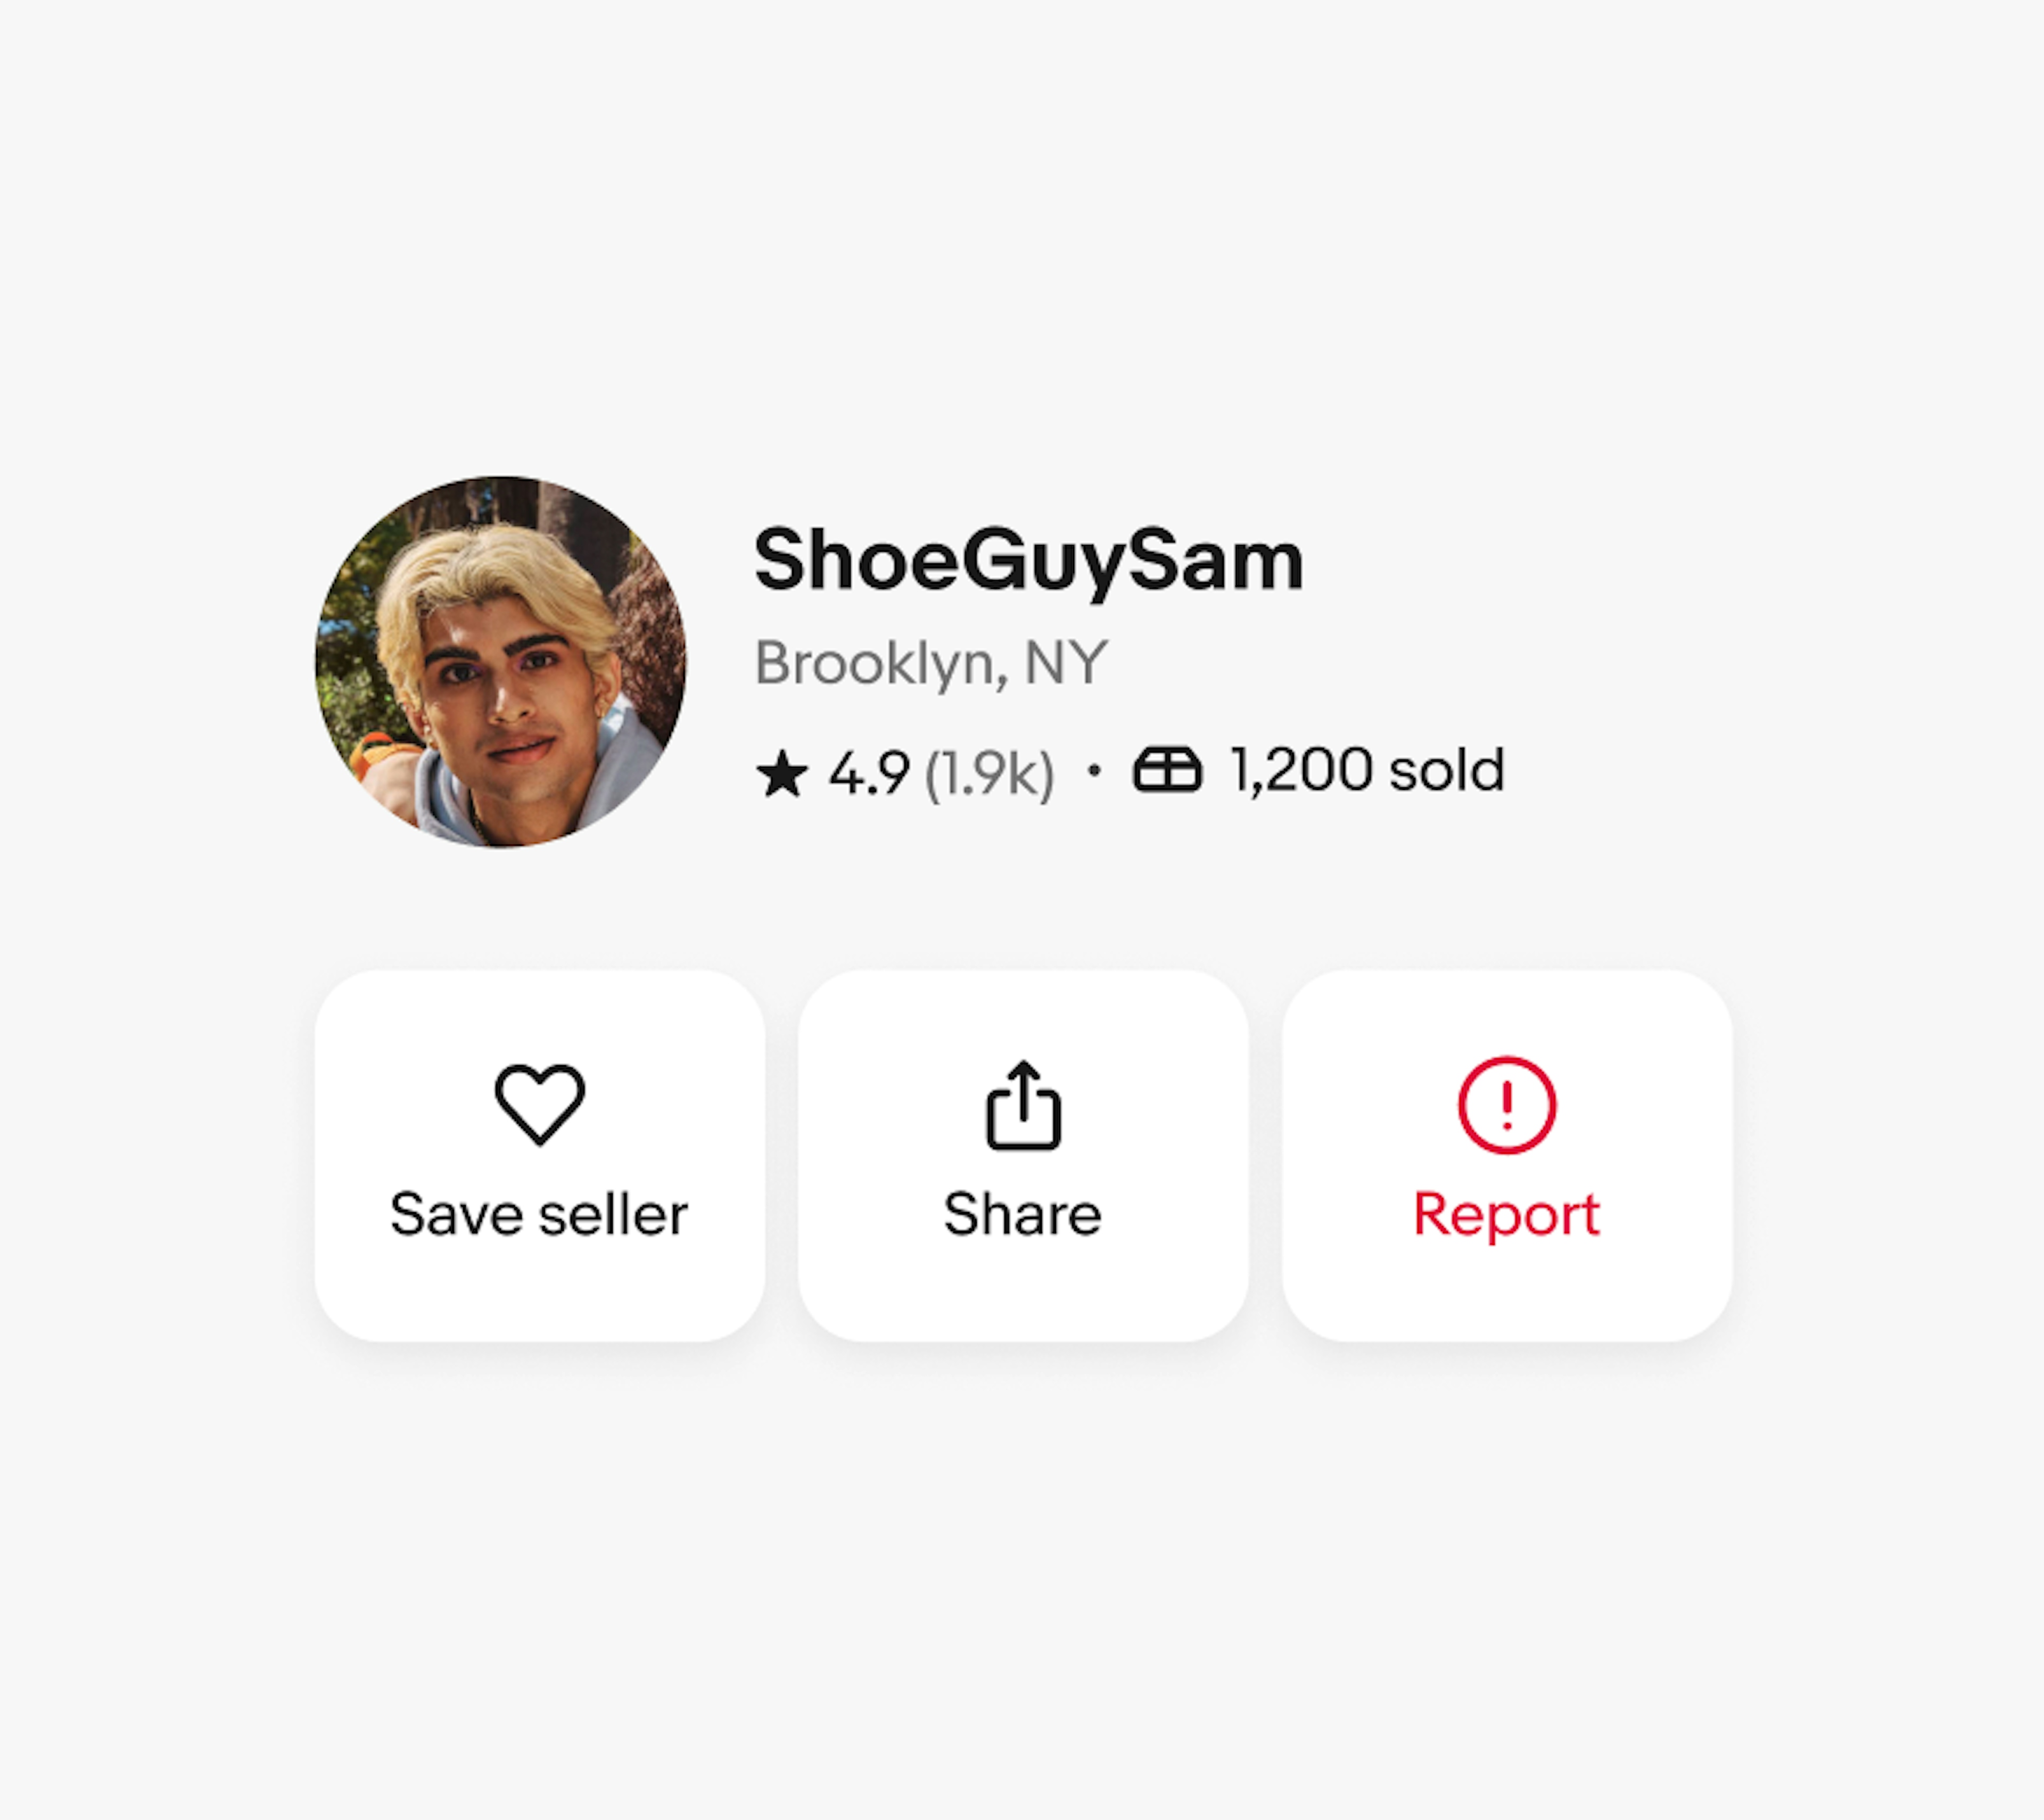 A store/profile lockup with an avatar next to the name “ShoeGuySam”, “Brooklyn, NY”. A star icon is used next to “4.9” and a package icon next to “1,200 sold”. There are three buttons below with icons and text. From left to right reads “Save seller” with a heart icon, “Share” with a share icon, and “Report” with an attention icon.